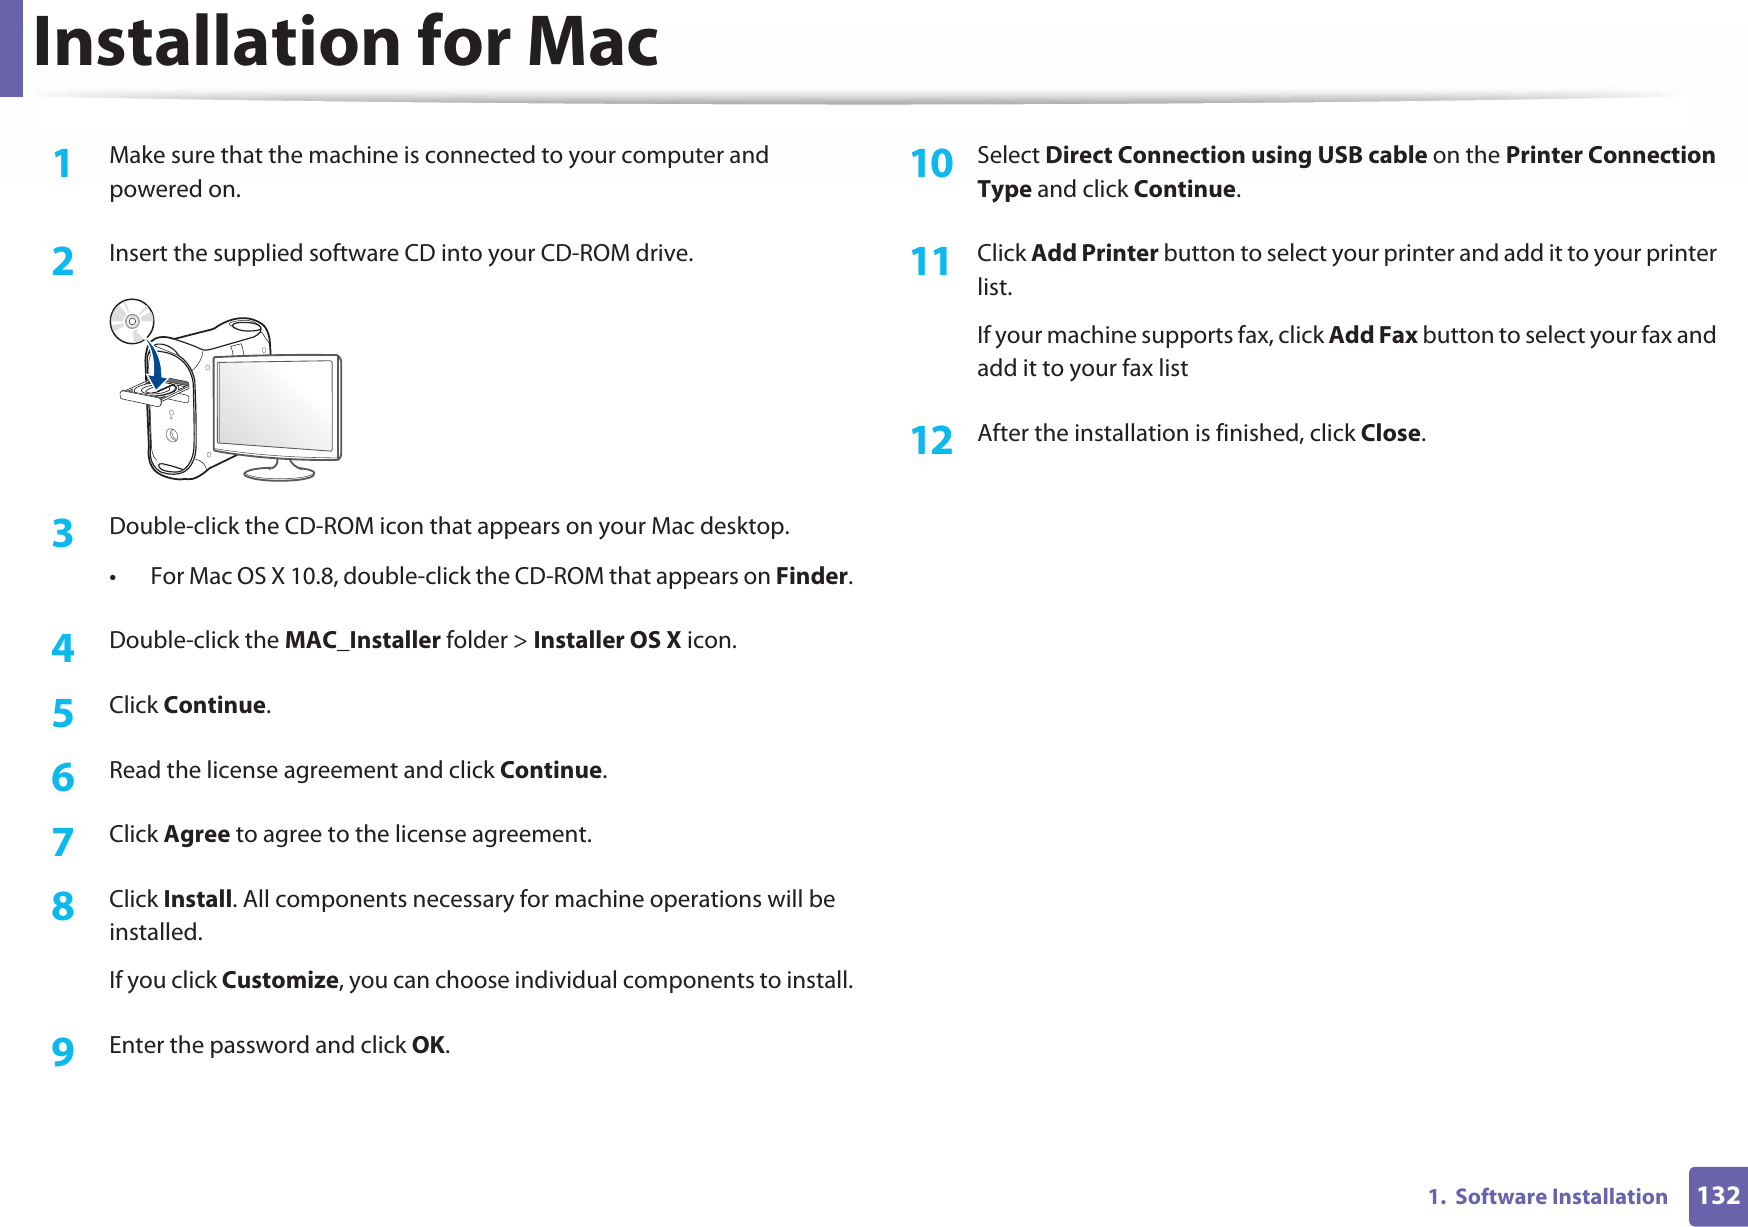 1321.  Software InstallationInstallation for Mac1Make sure that the machine is connected to your computer and powered on.2  Insert the supplied software CD into your CD-ROM drive.3  Double-click the CD-ROM icon that appears on your Mac desktop.• For Mac OS X 10.8, double-click the CD-ROM that appears on Finder.4  Double-click the MAC_Installer folder &gt; Installer OS X icon.5  Click Continue.6  Read the license agreement and click Continue.7  Click Agree to agree to the license agreement.8  Click Install. All components necessary for machine operations will be installed.If you click Customize, you can choose individual components to install.9  Enter the password and click OK.10  Select Direct Connection using USB cable on the Printer Connection Type and click Continue.11  Click Add Printer button to select your printer and add it to your printer list.If your machine supports fax, click Add Fax button to select your fax and add it to your fax list12  After the installation is finished, click Close.